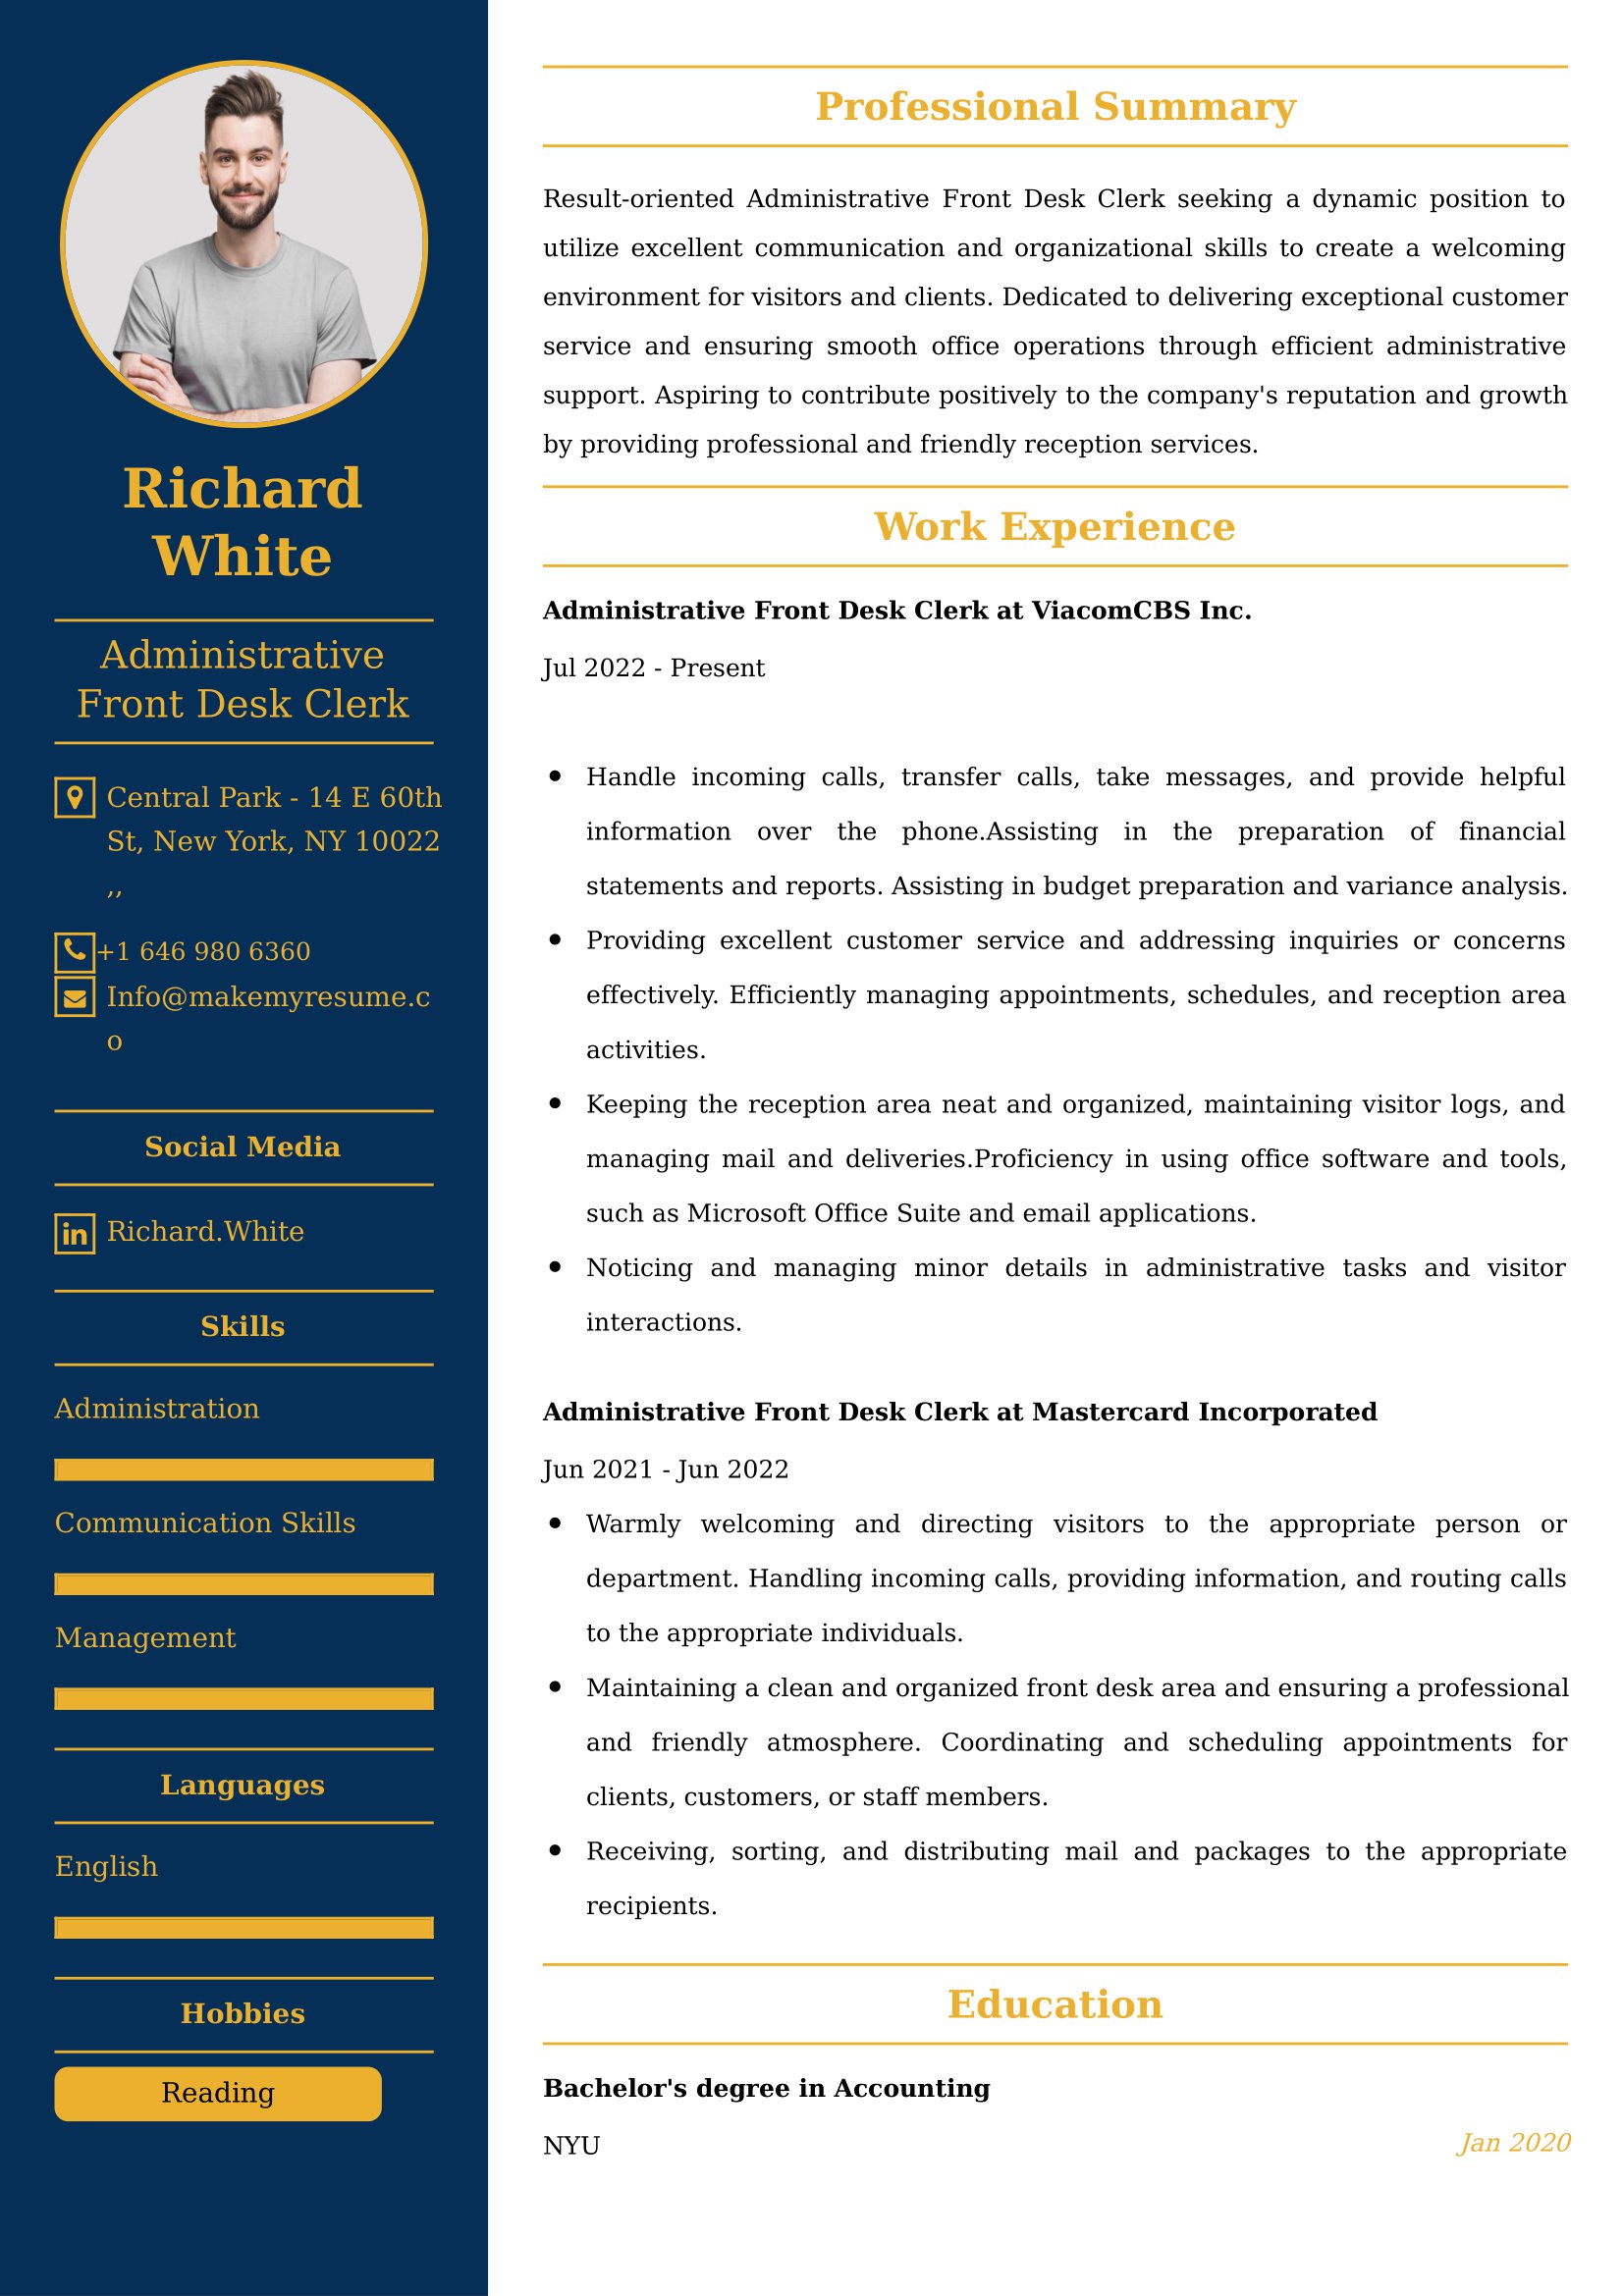 Administrative Front Desk Clerk CV Examples Malaysia